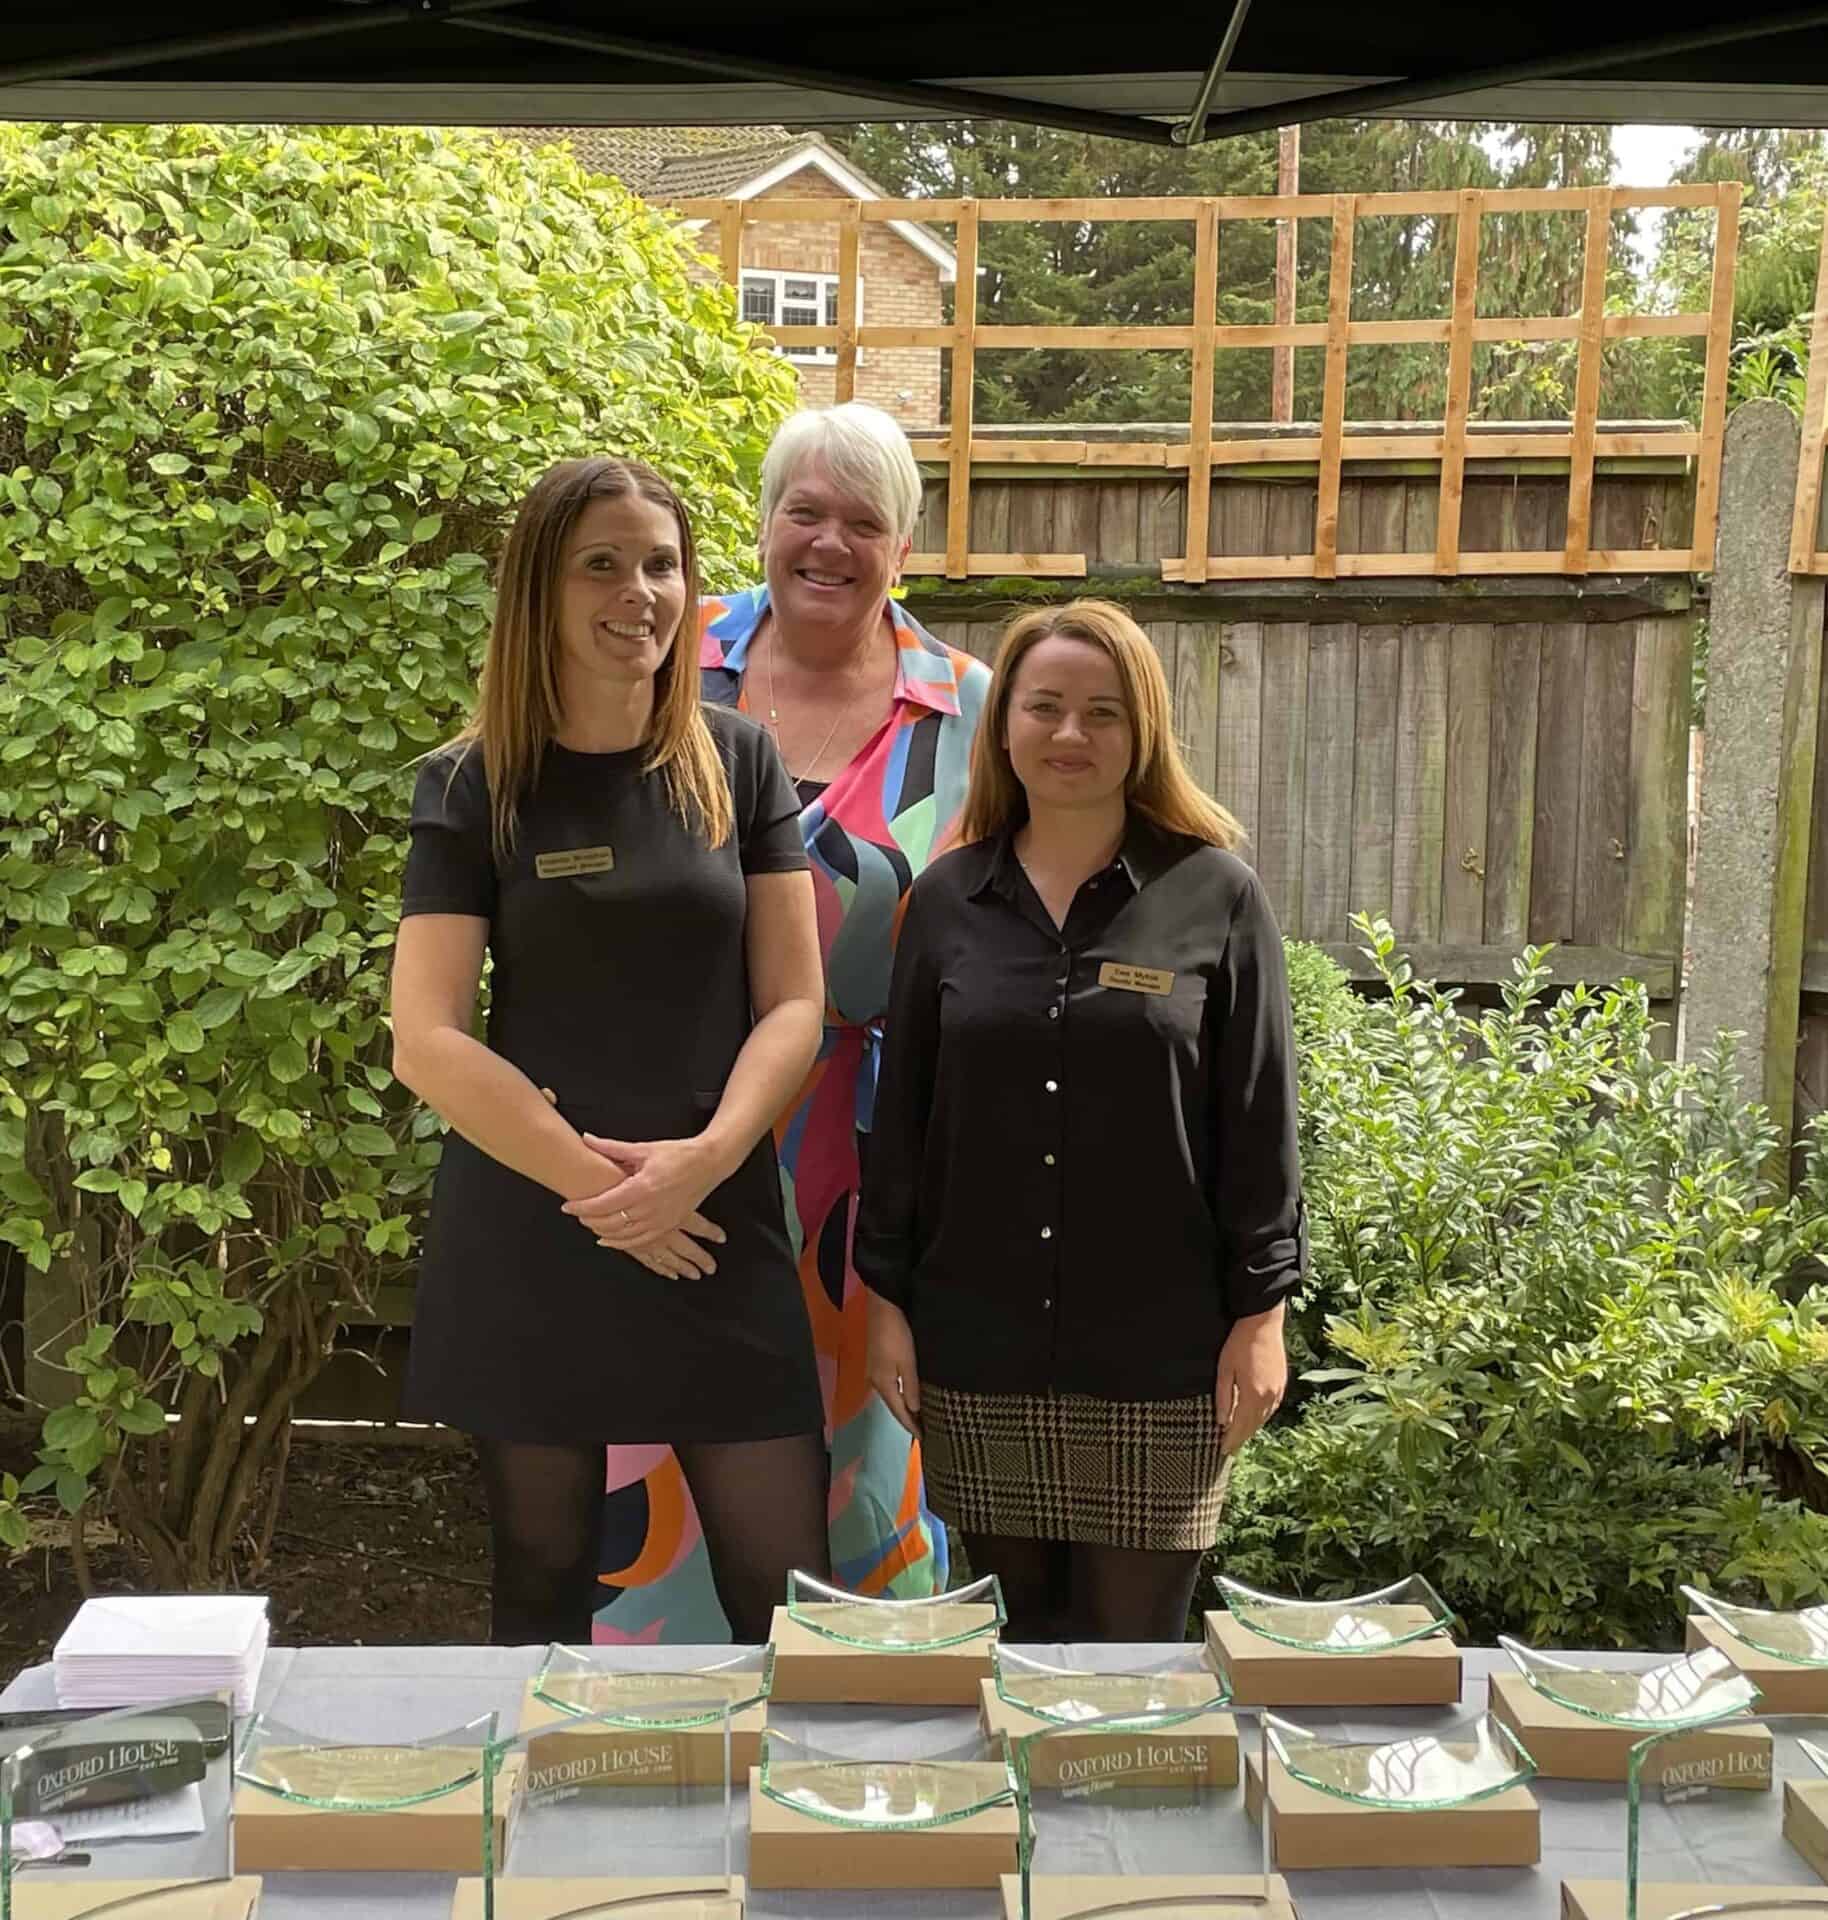 Three women standing behind a table with neatly arranged boxes, smiling and posing for a photo at what appears to be an outdoor event or gathering.